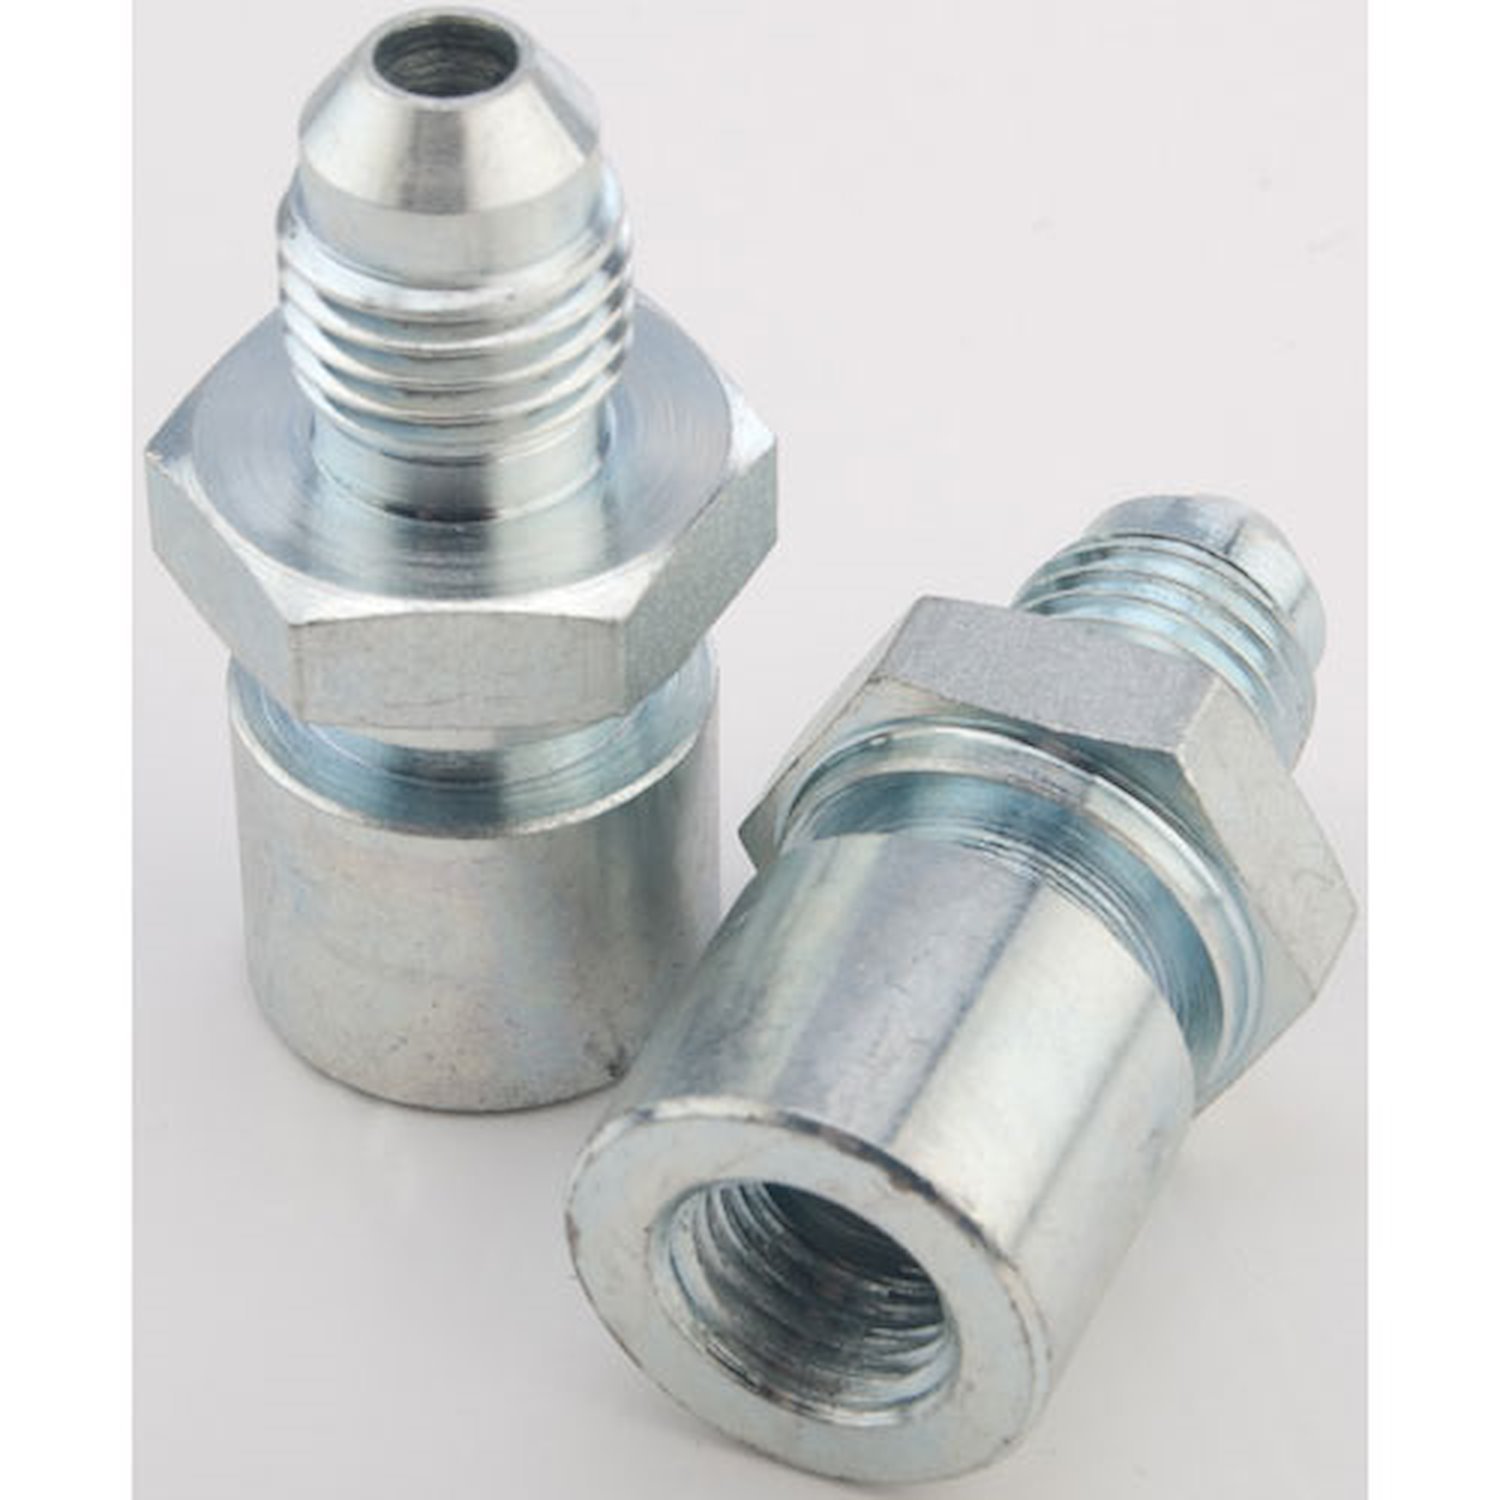 AN to Inverted Flare Female Tube Adapter Fittings -3AN x 7/16"-24 Inverted Flare